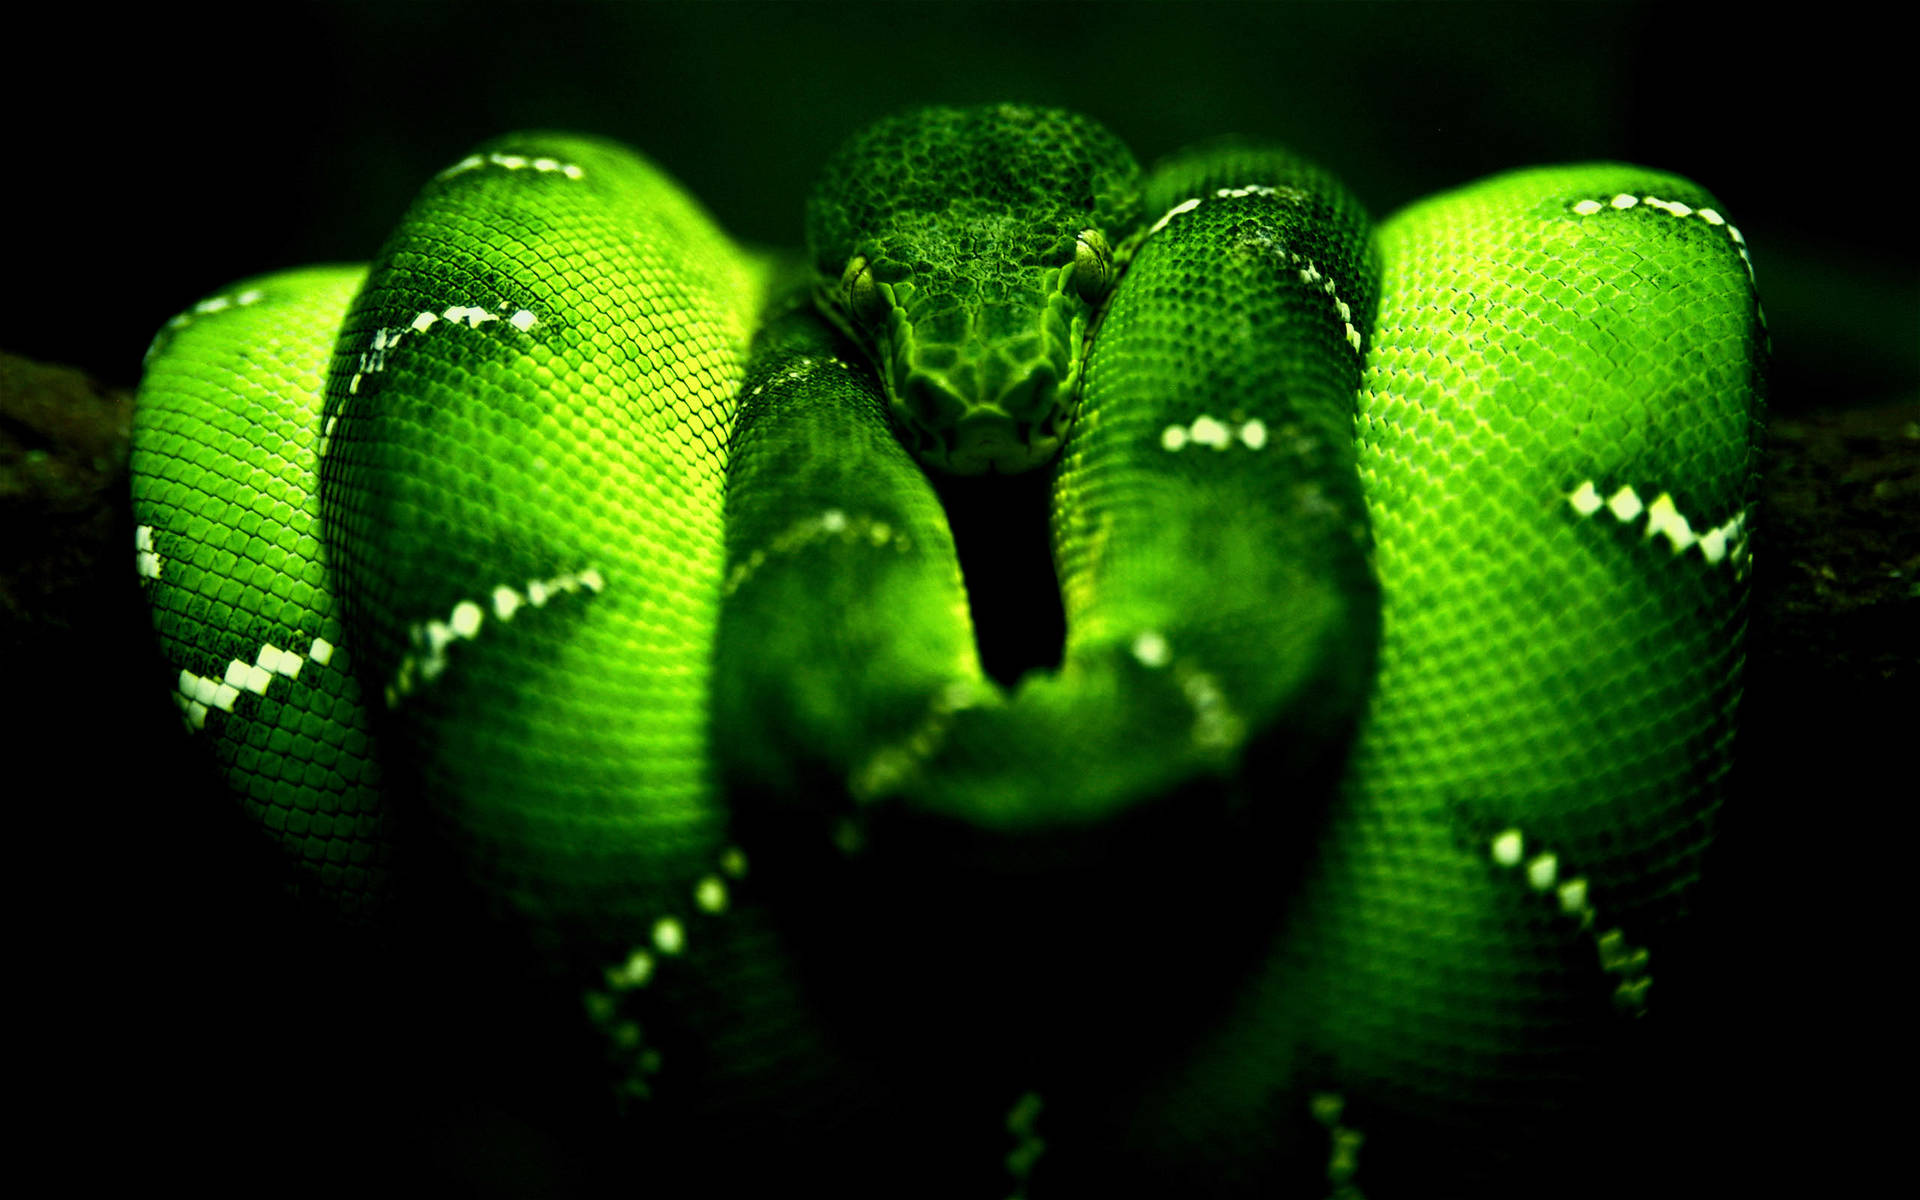 Free Emerald Green Wallpaper Downloads, [100+] Emerald Green Wallpapers for  FREE 